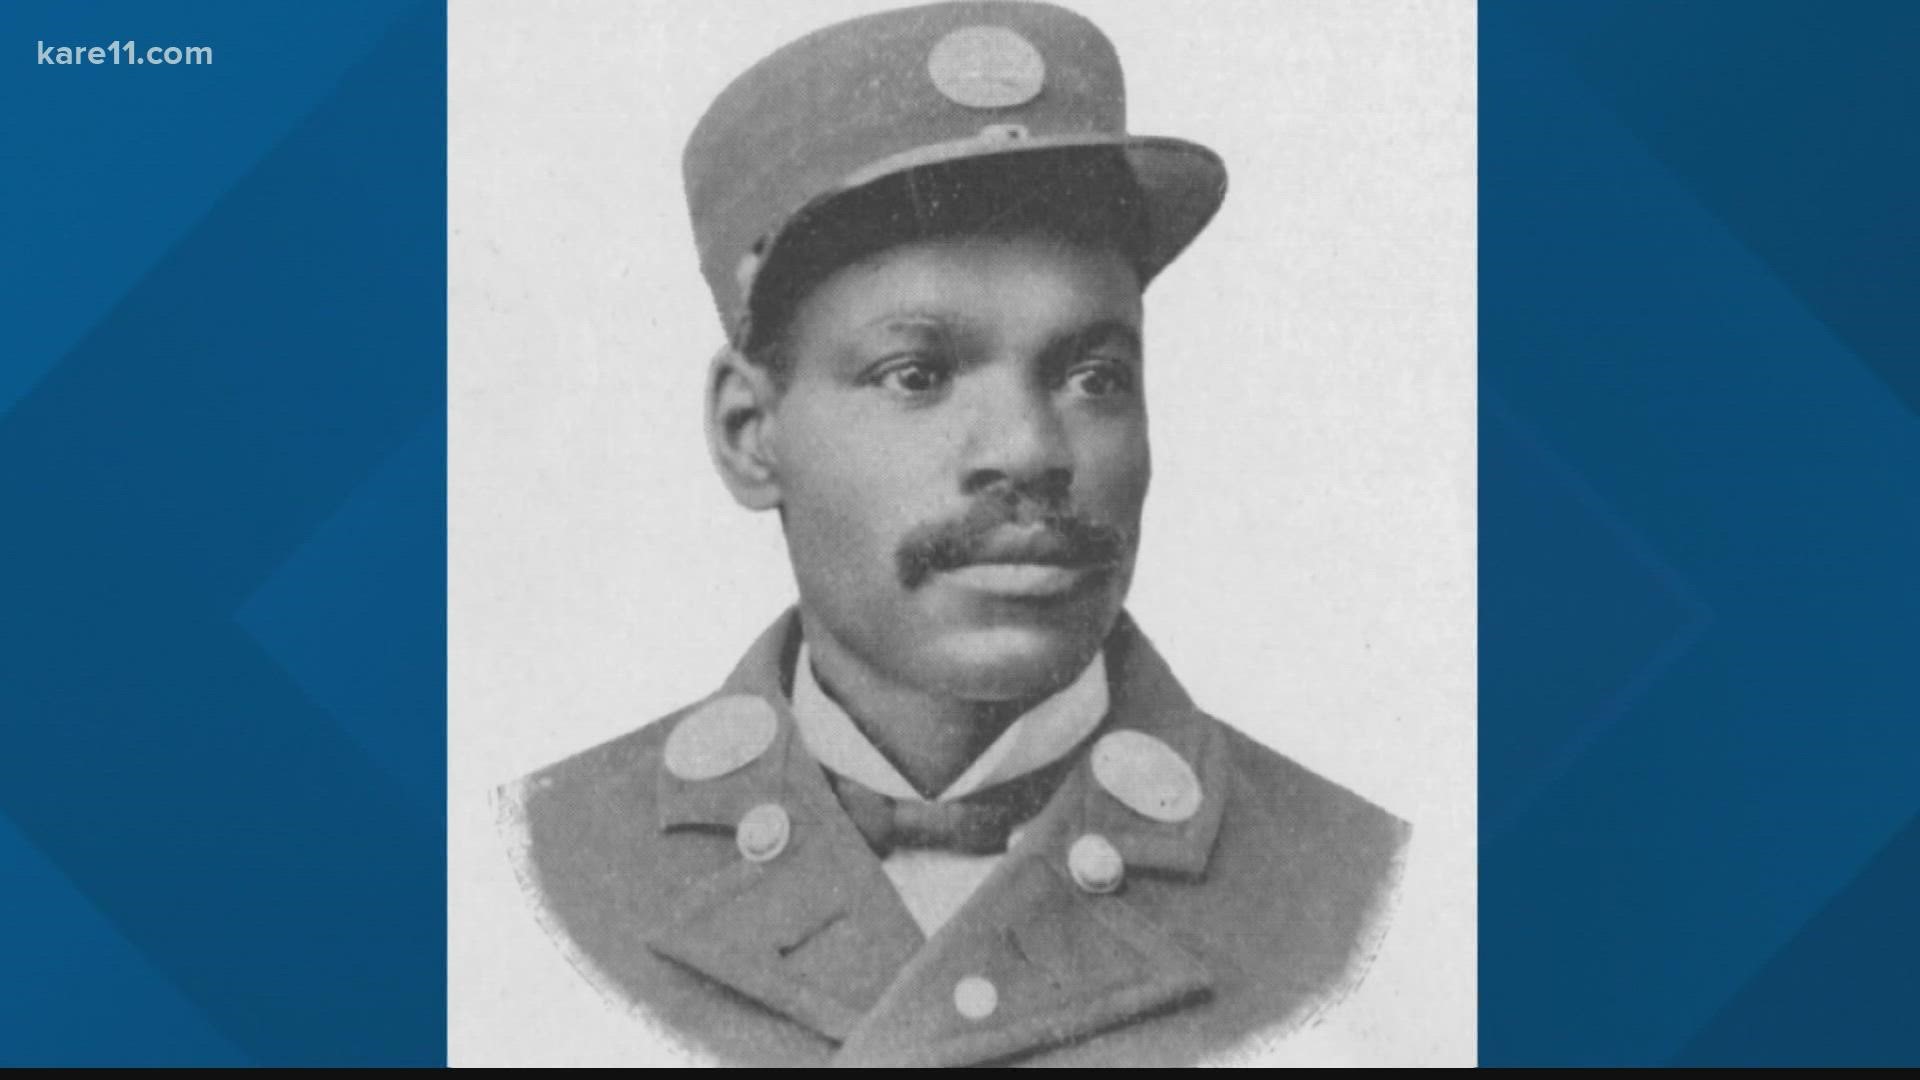 South Minneapolis’ Dight Avenue will soon be named for the late MFD Fire captain John Cheatham, who became the city’s first Black firefighter in 1888.